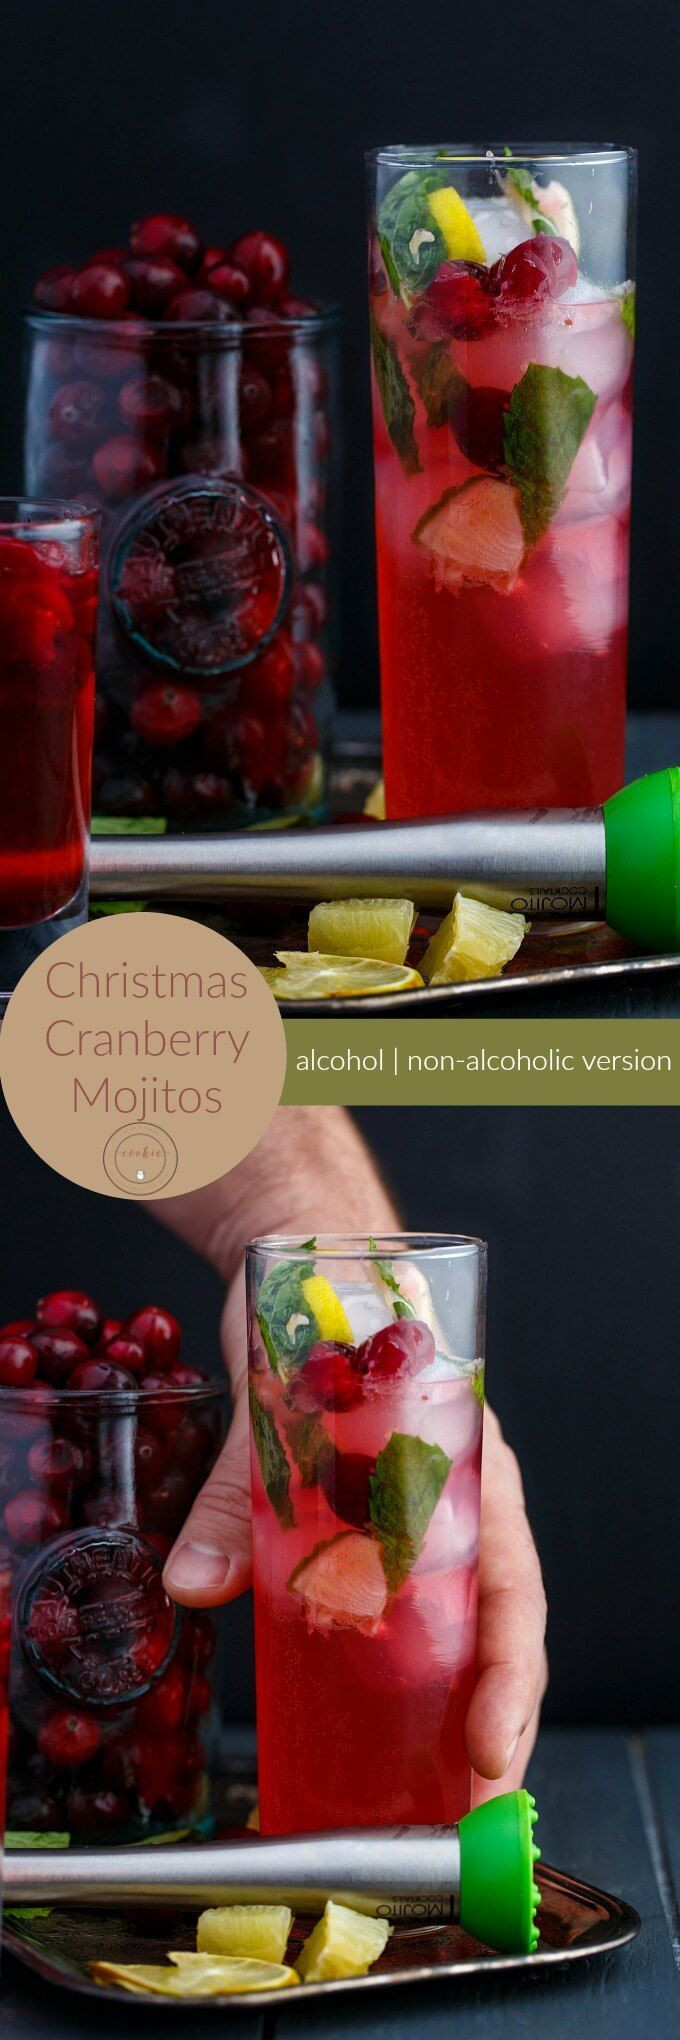 Christmas Drink Recipes With Alcohol
 1000 images about Cocktail Hour on Pinterest